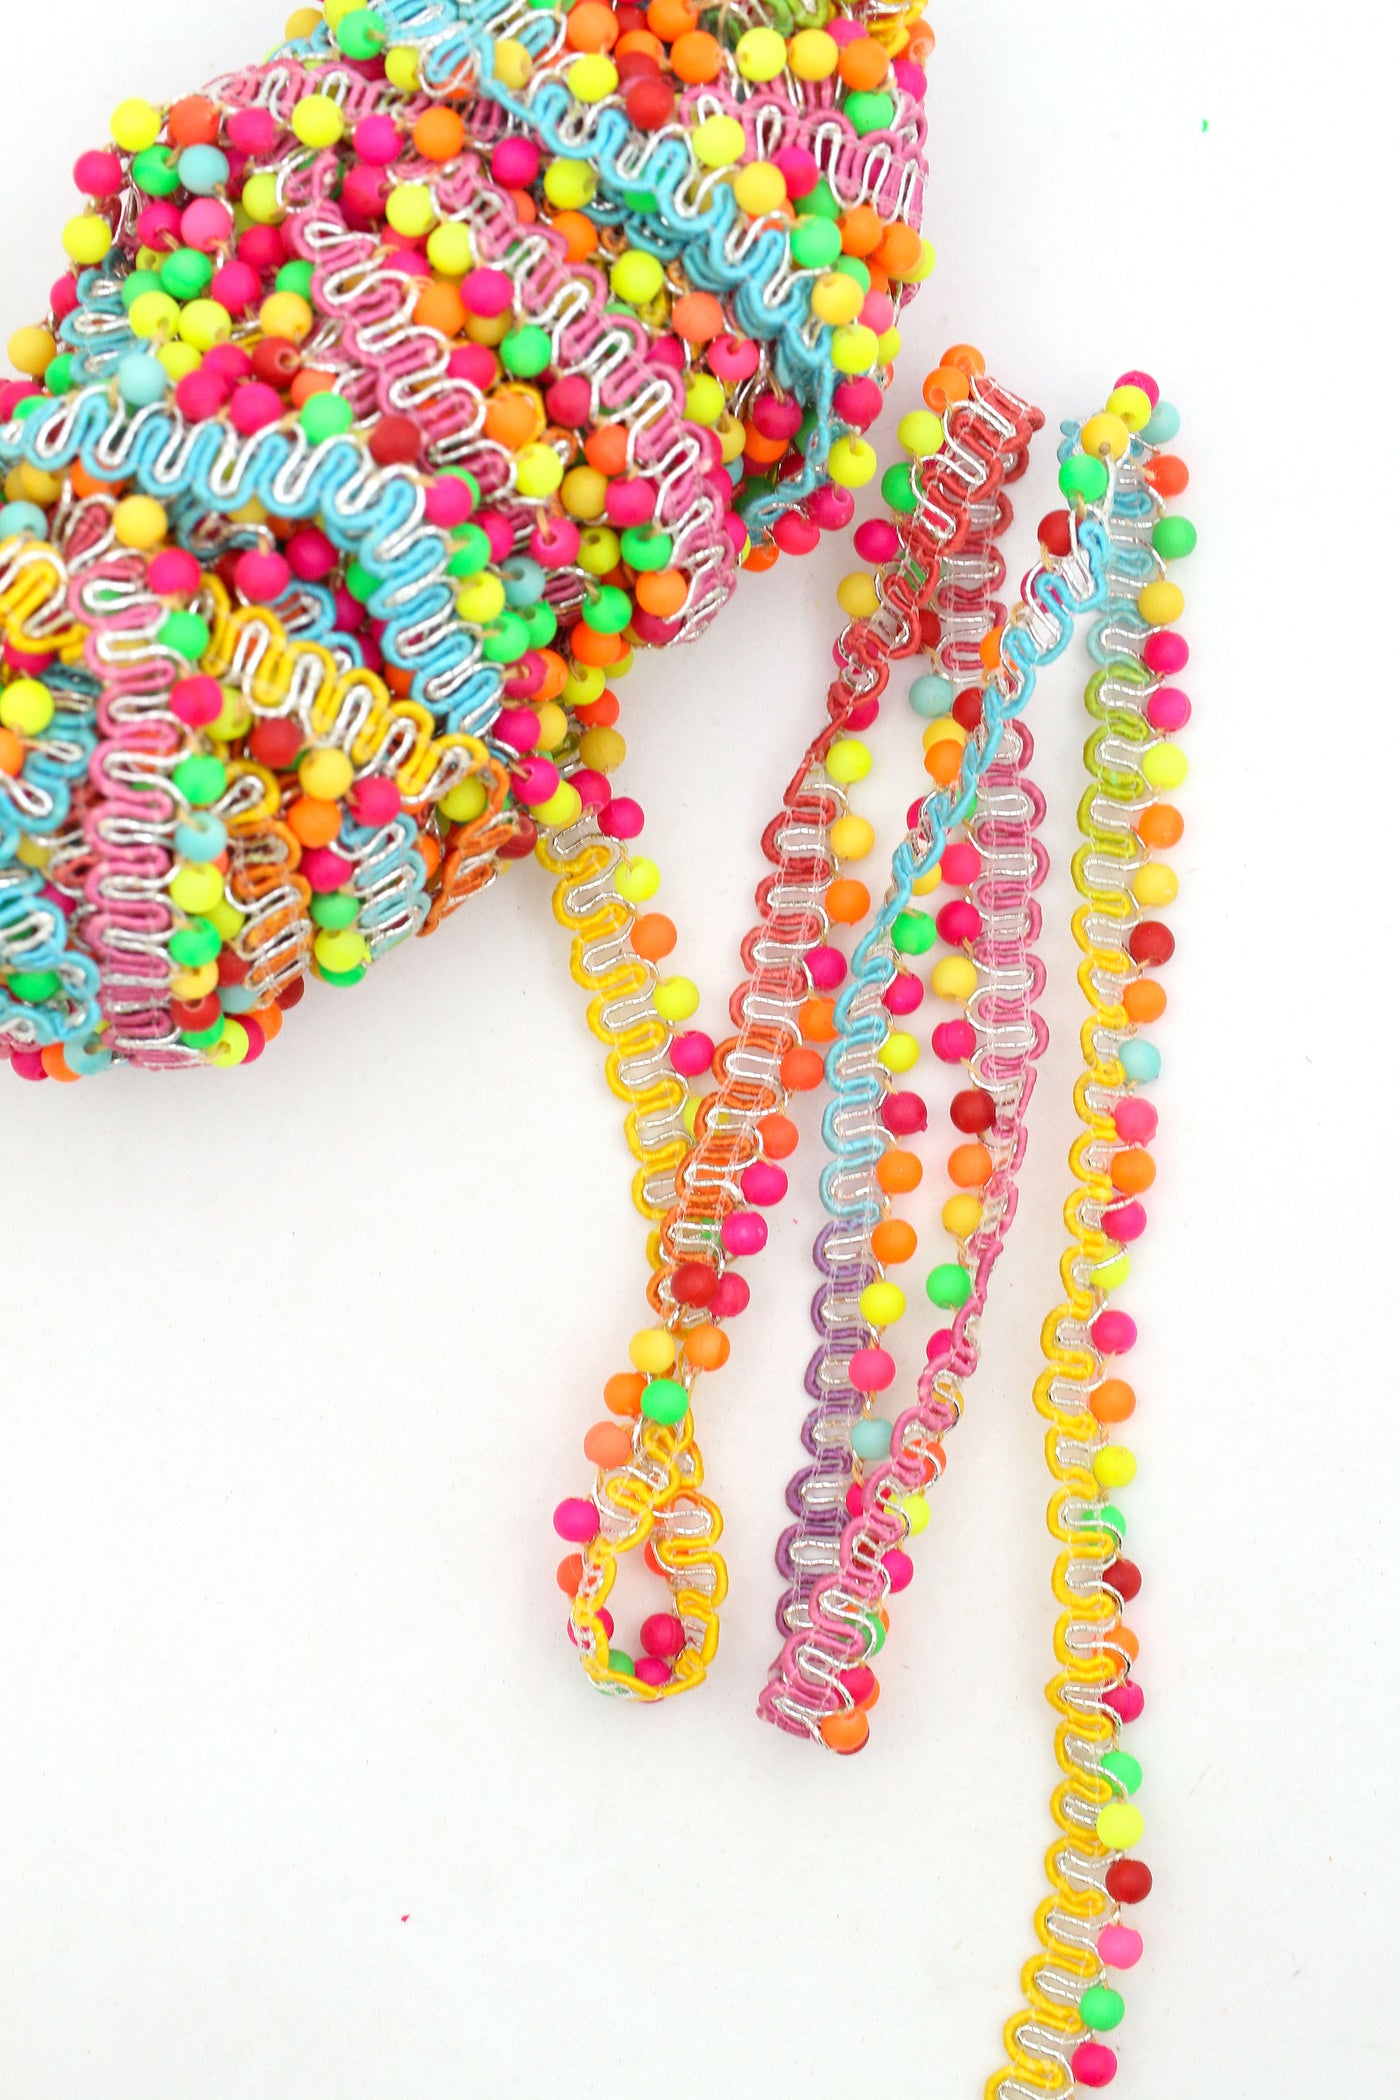 Neon bead sewing beaded trim, trimming, costume, sequin edging, sewing, embellishment, decoration